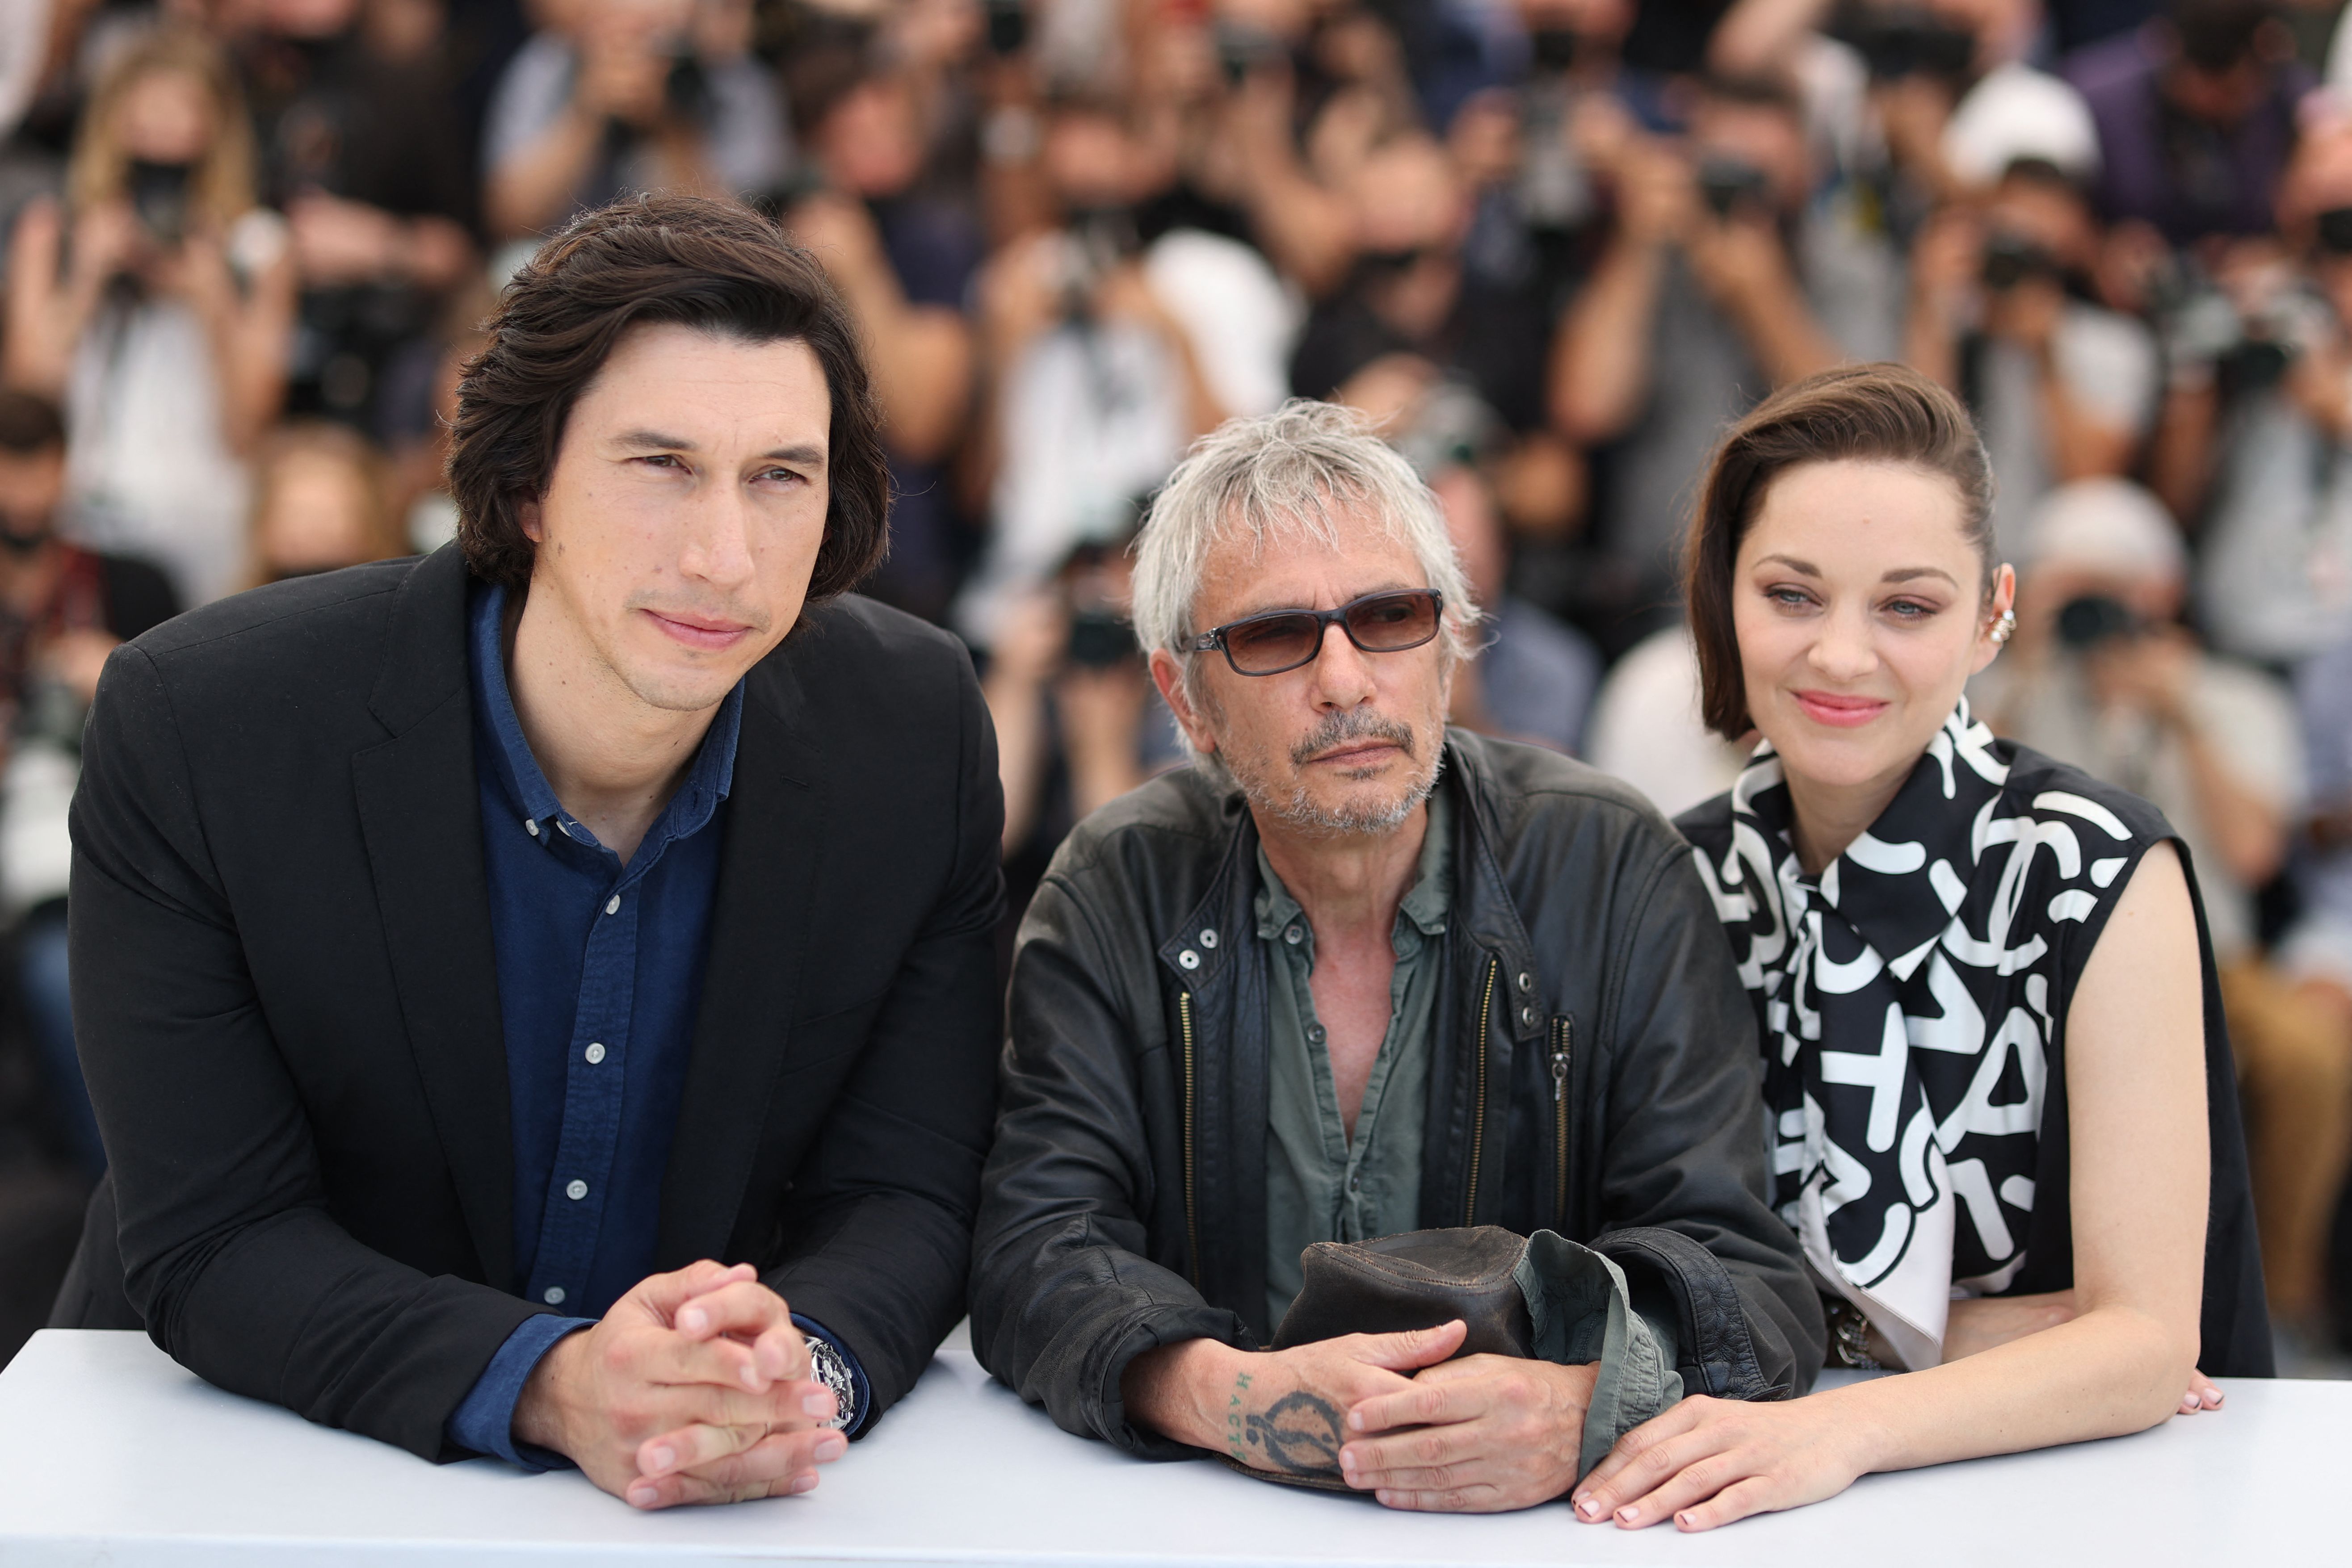 Adam Driver, Leos Carax, and Marion Cotillard pose during a photocall for the film "Annette" at the 74th edition of the Cannes Film Festival